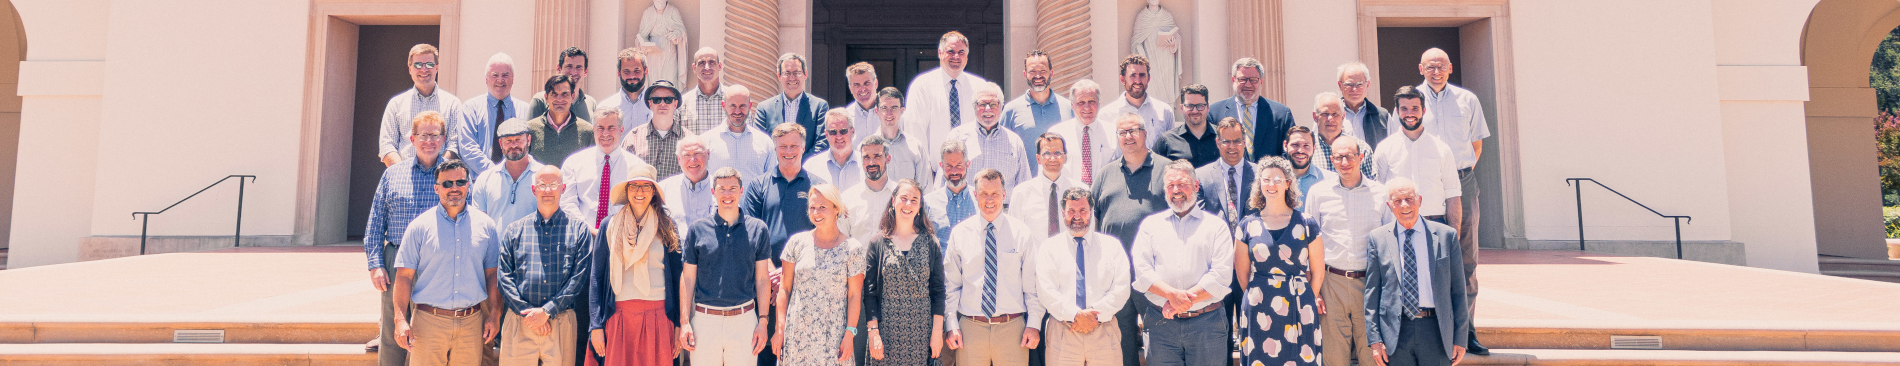 Faculty from both campuses pose together for a photo on the steps of the California chapel